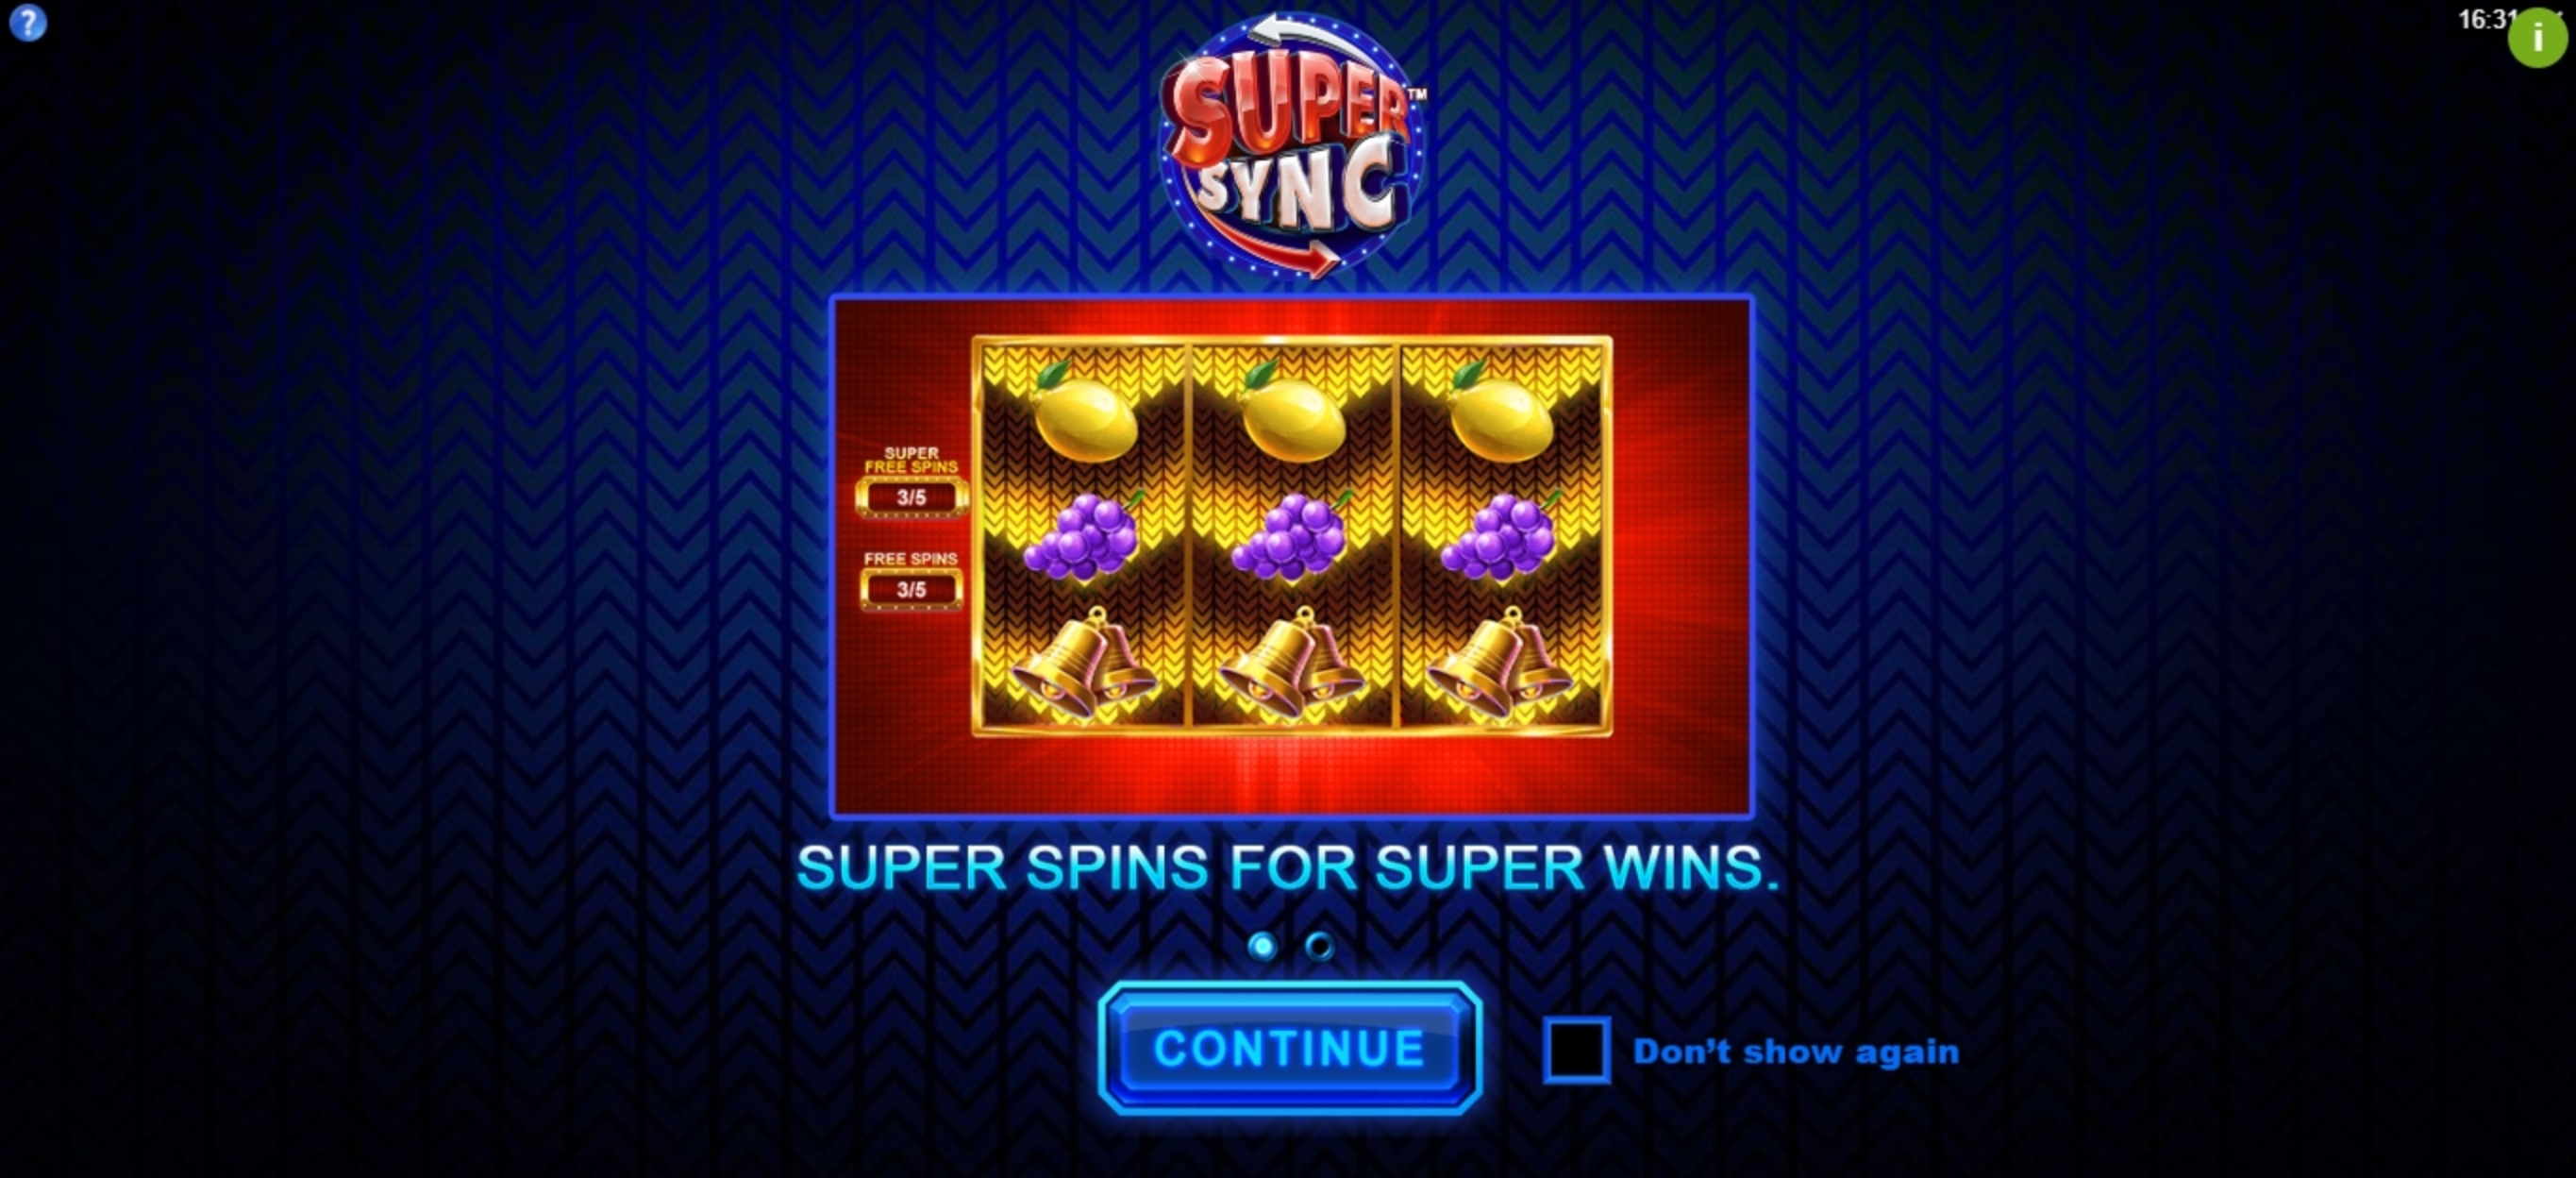 Play Super Sync Free Casino Slot Game by Plank Gaming